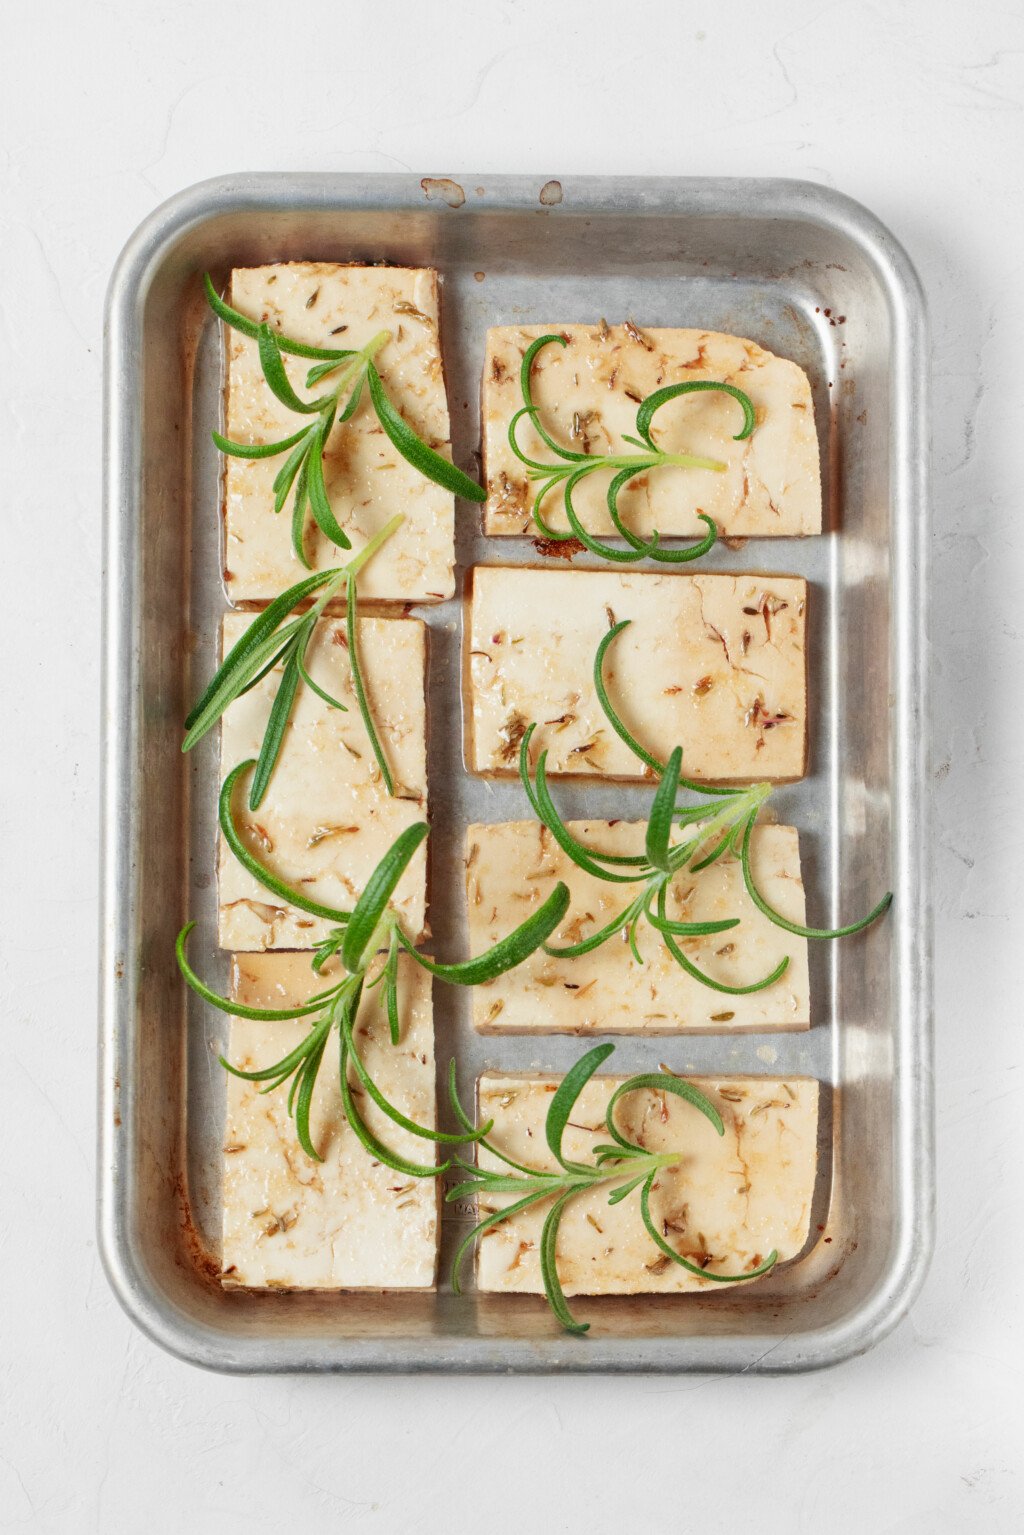 An overhead image of a small, silver baking dish, which has been filled with tofu slices and fresh rosemary prior to baking.